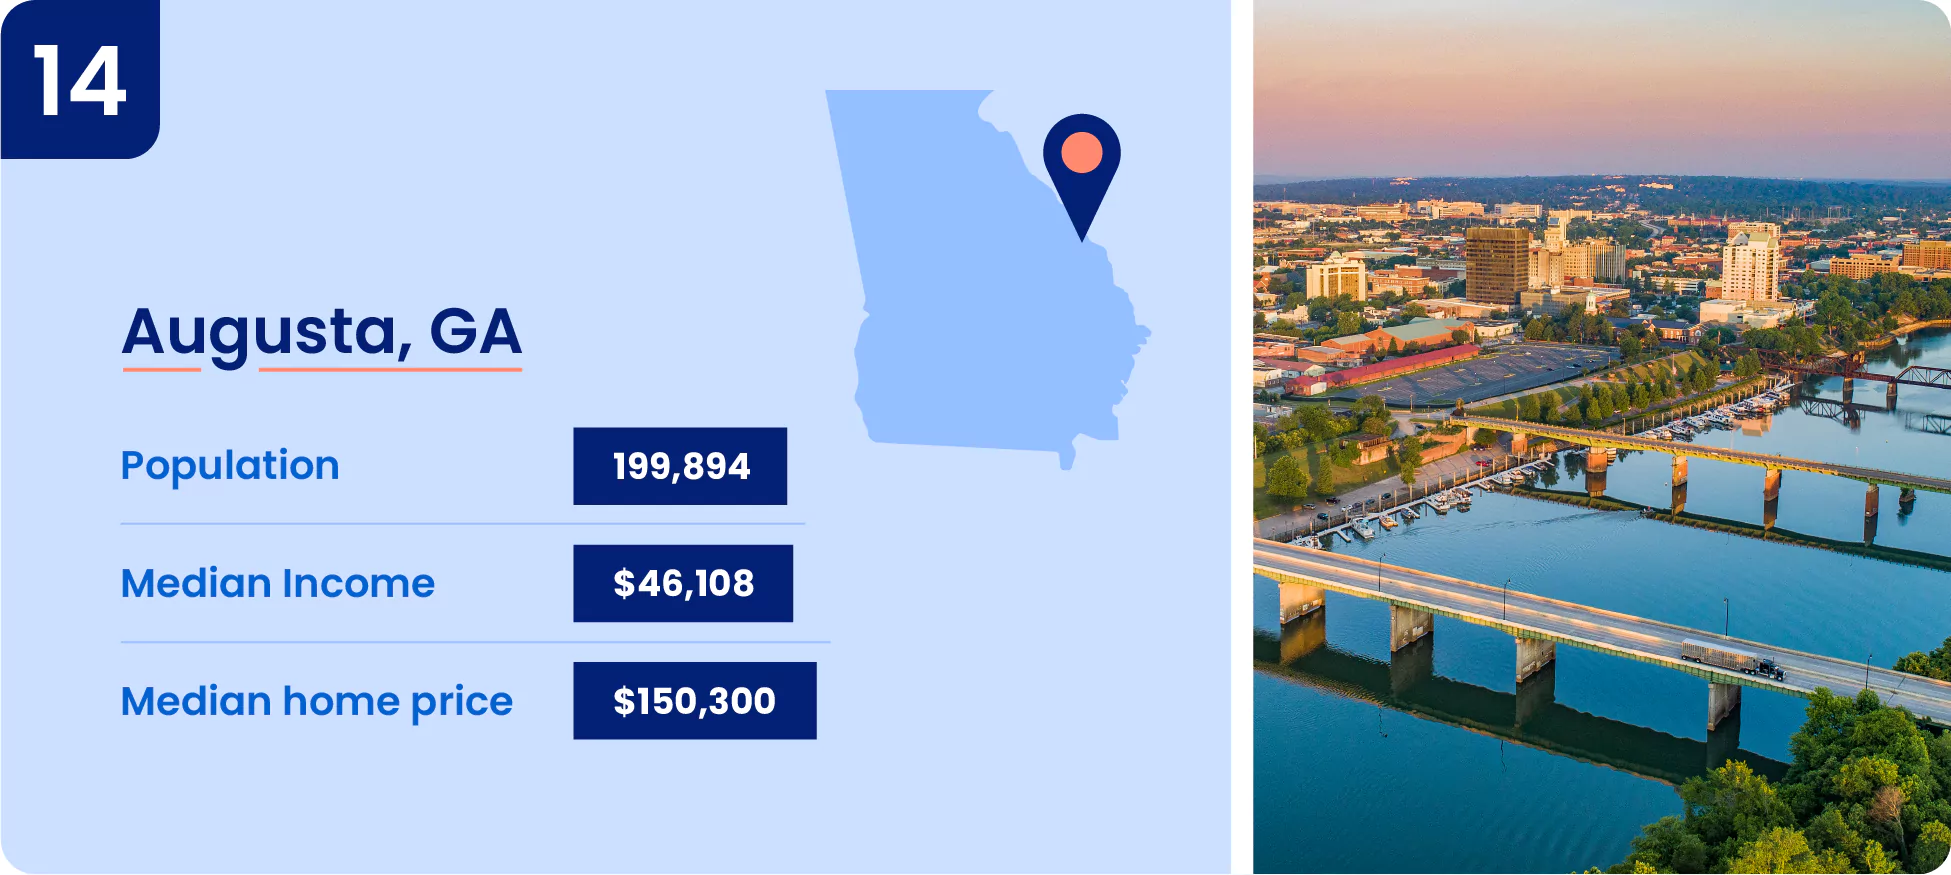 Image shows key information about one of the cheapest place to live in Georgia, the city of Augusta.